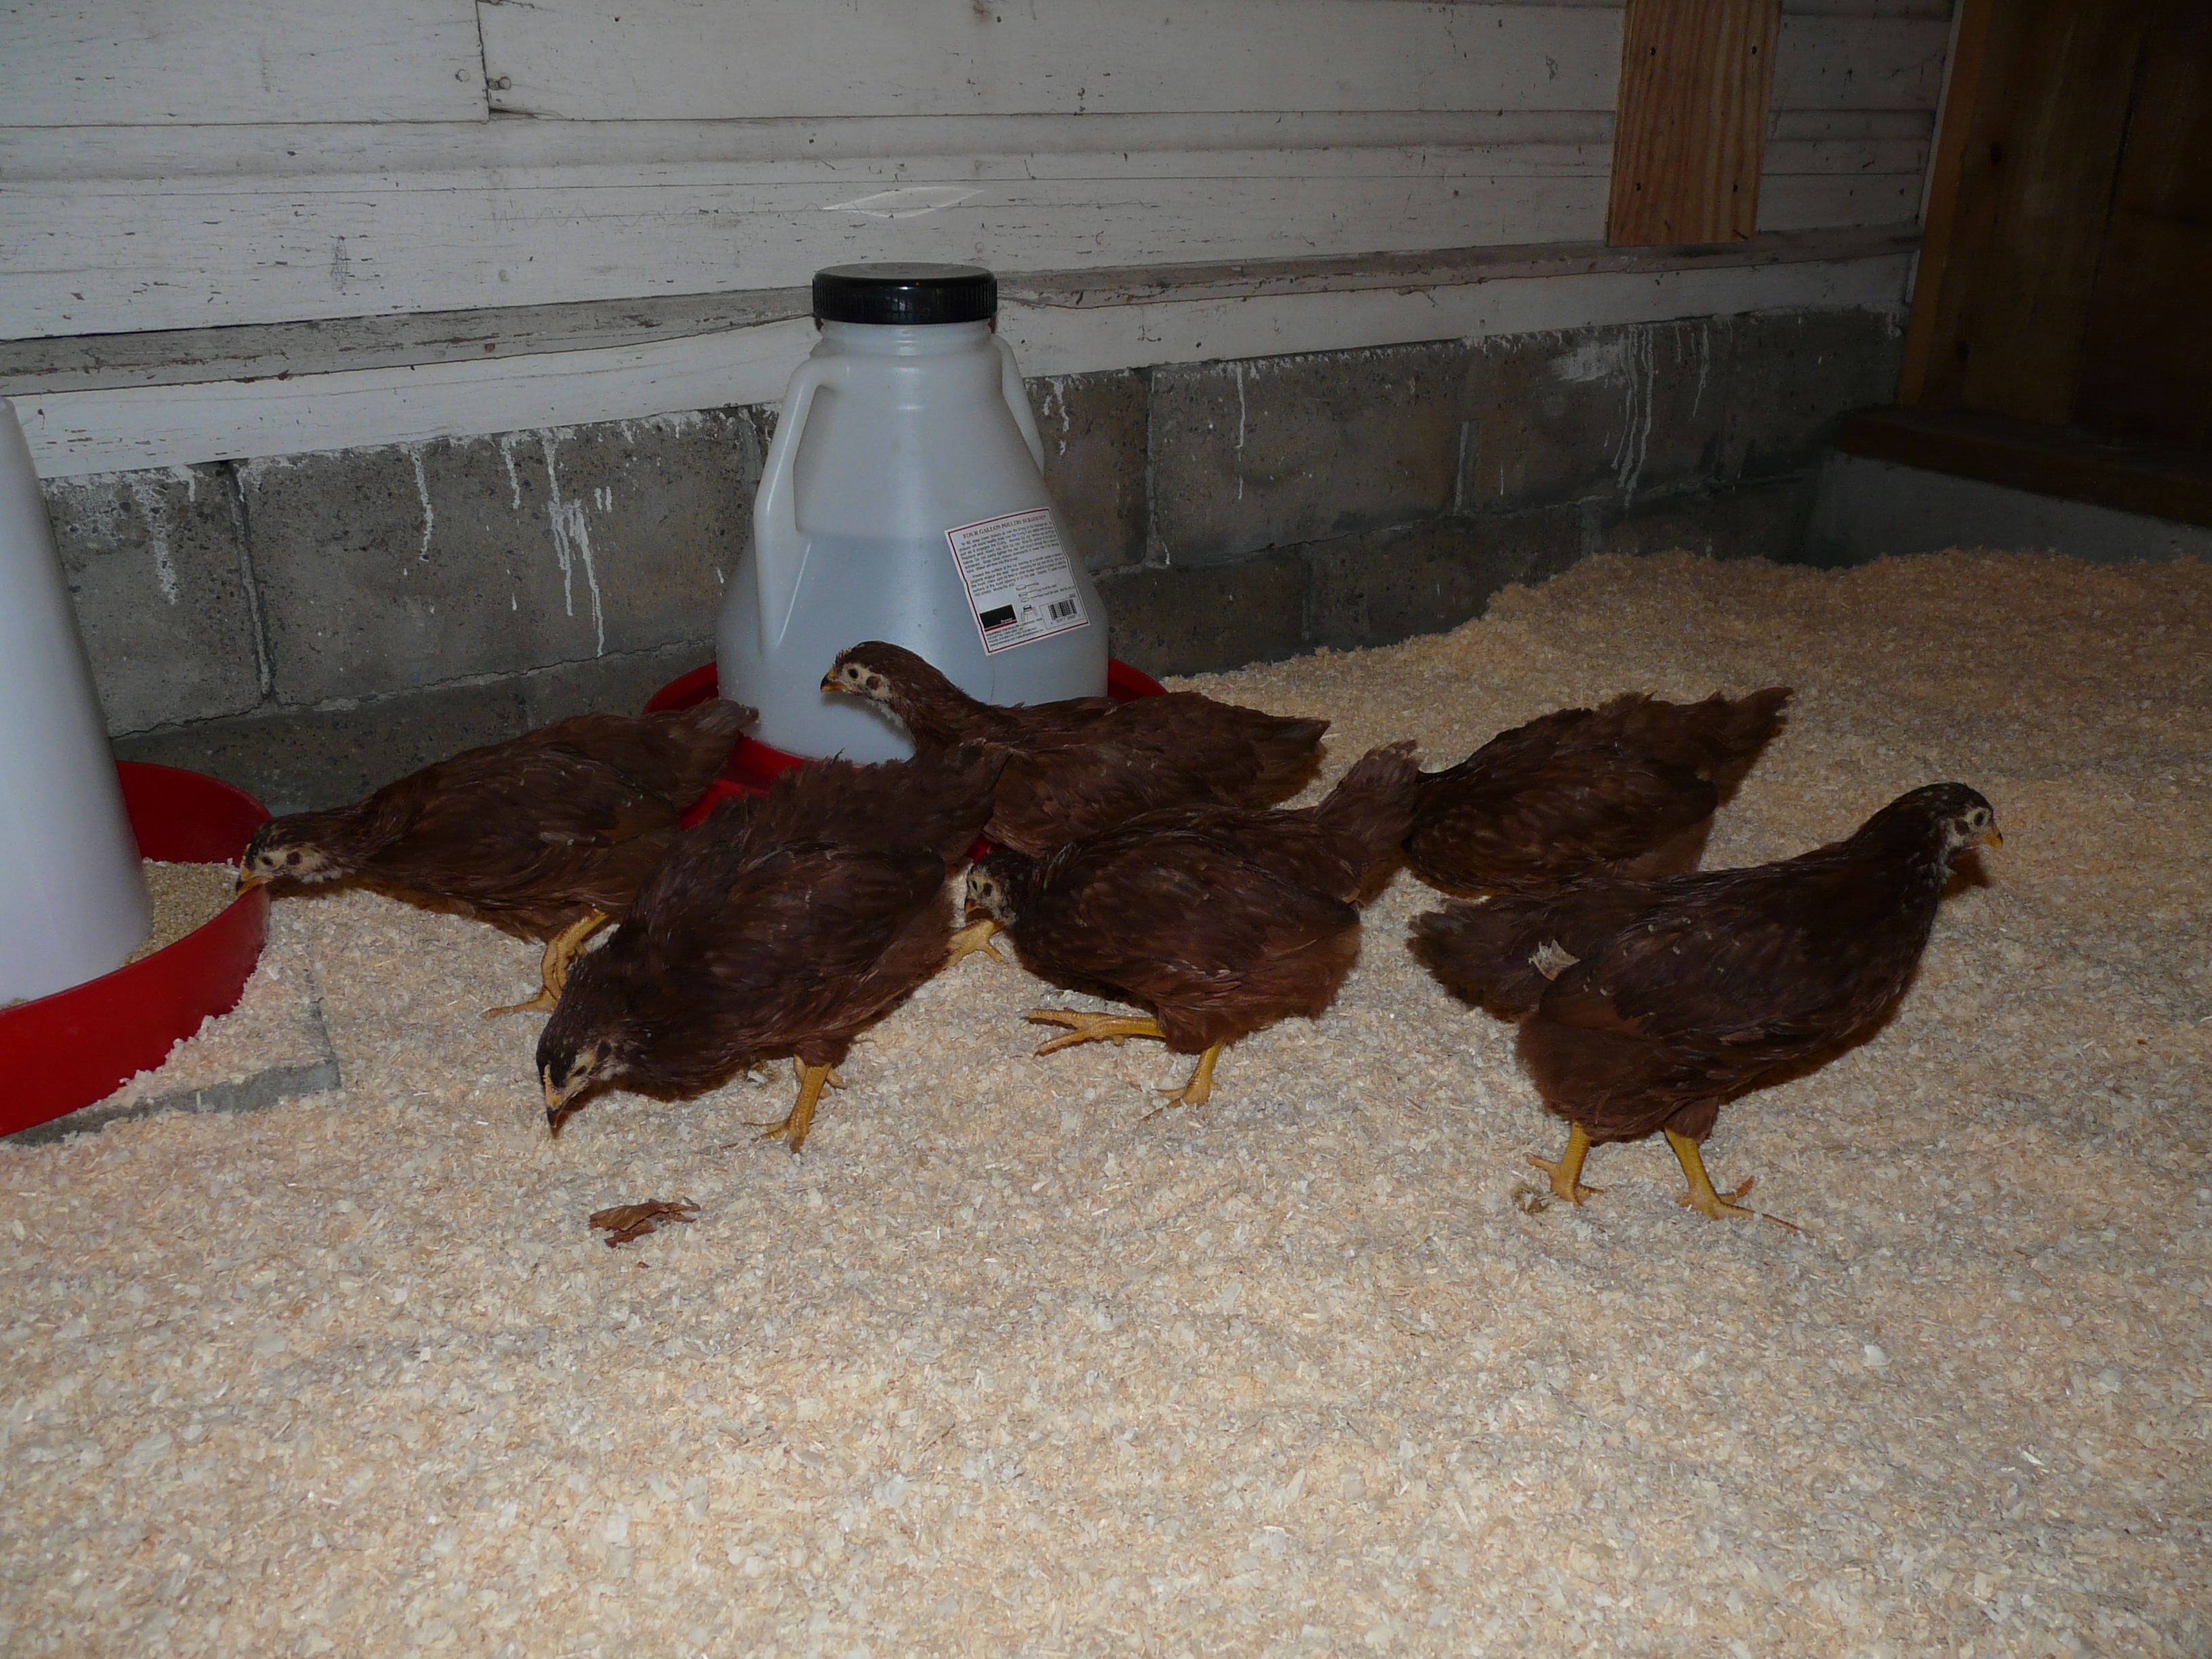 5-5-2011
First day in their coop!